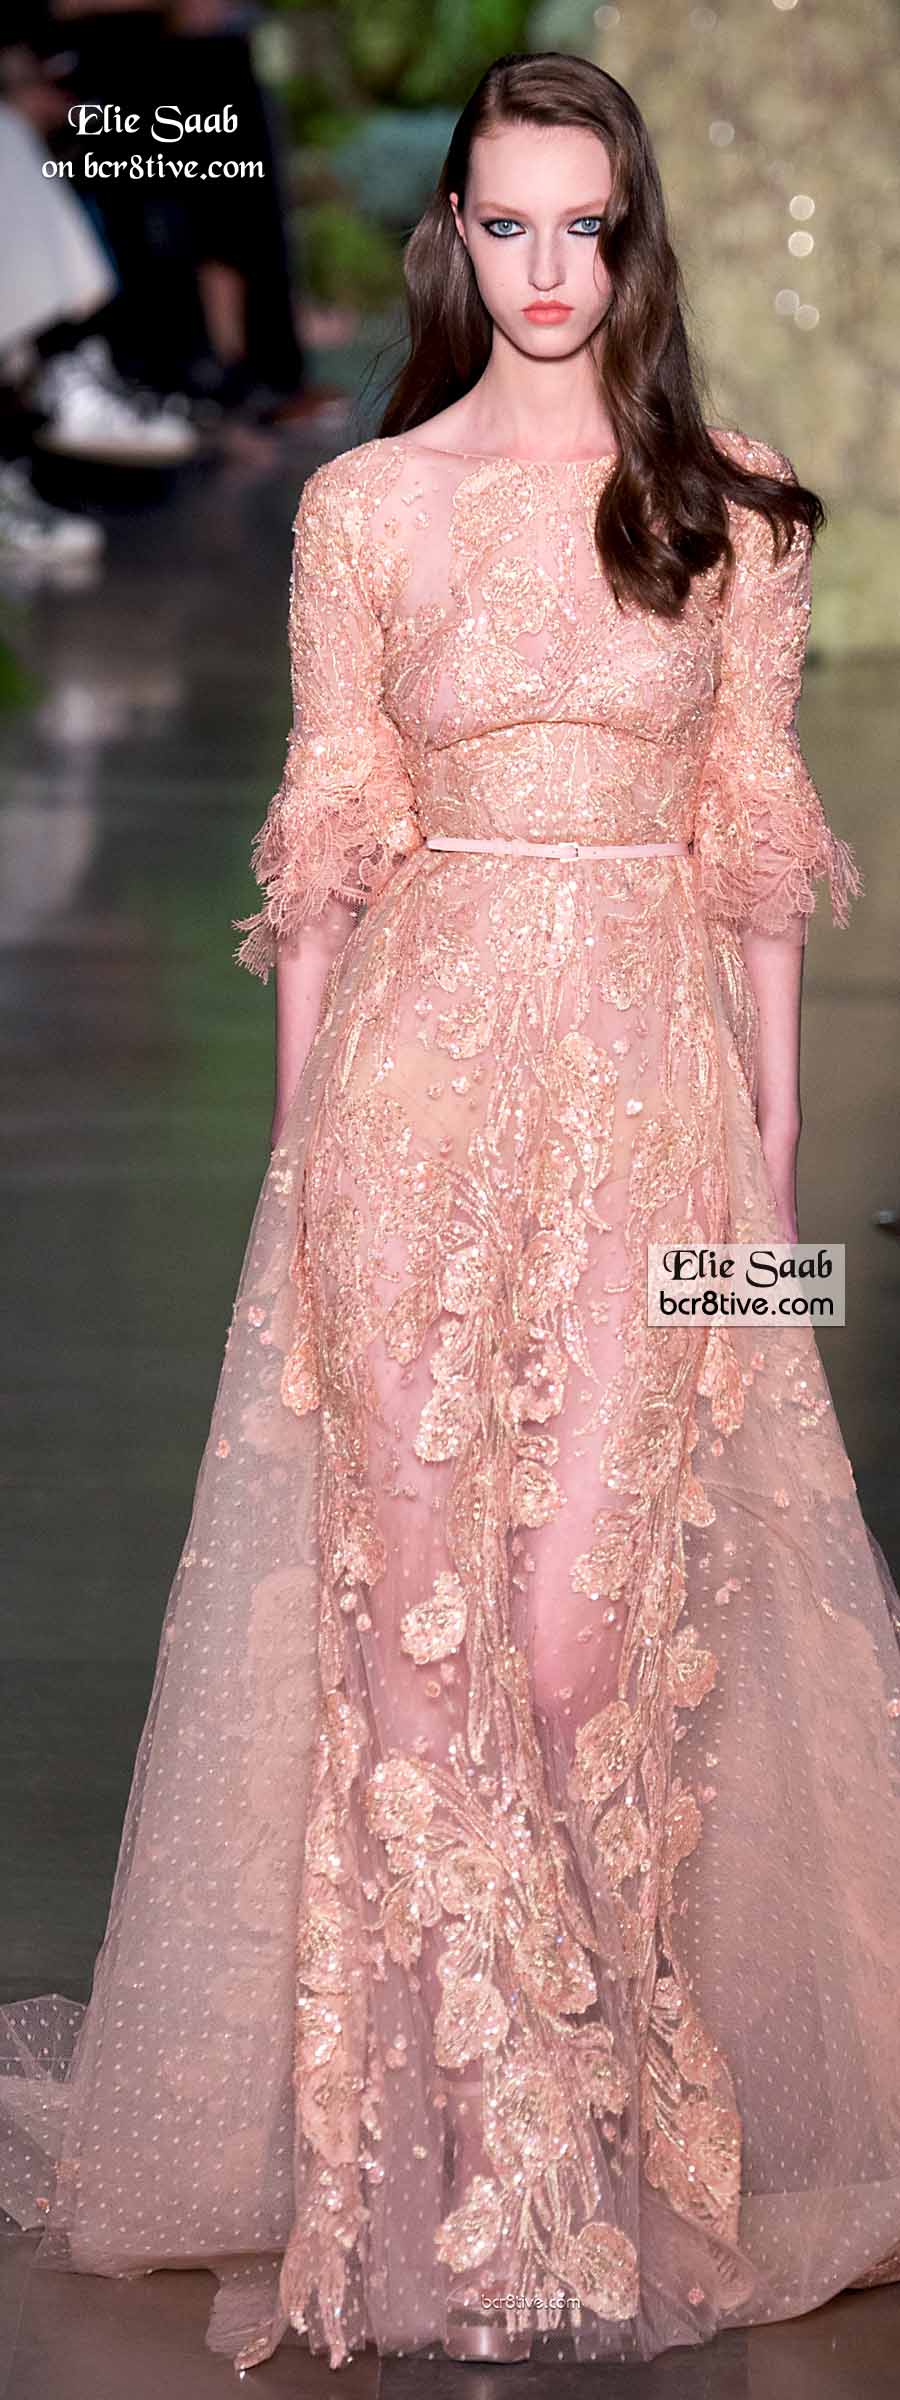 Elie Saab Spring 2015 Couture – Page 2 – Be Creative